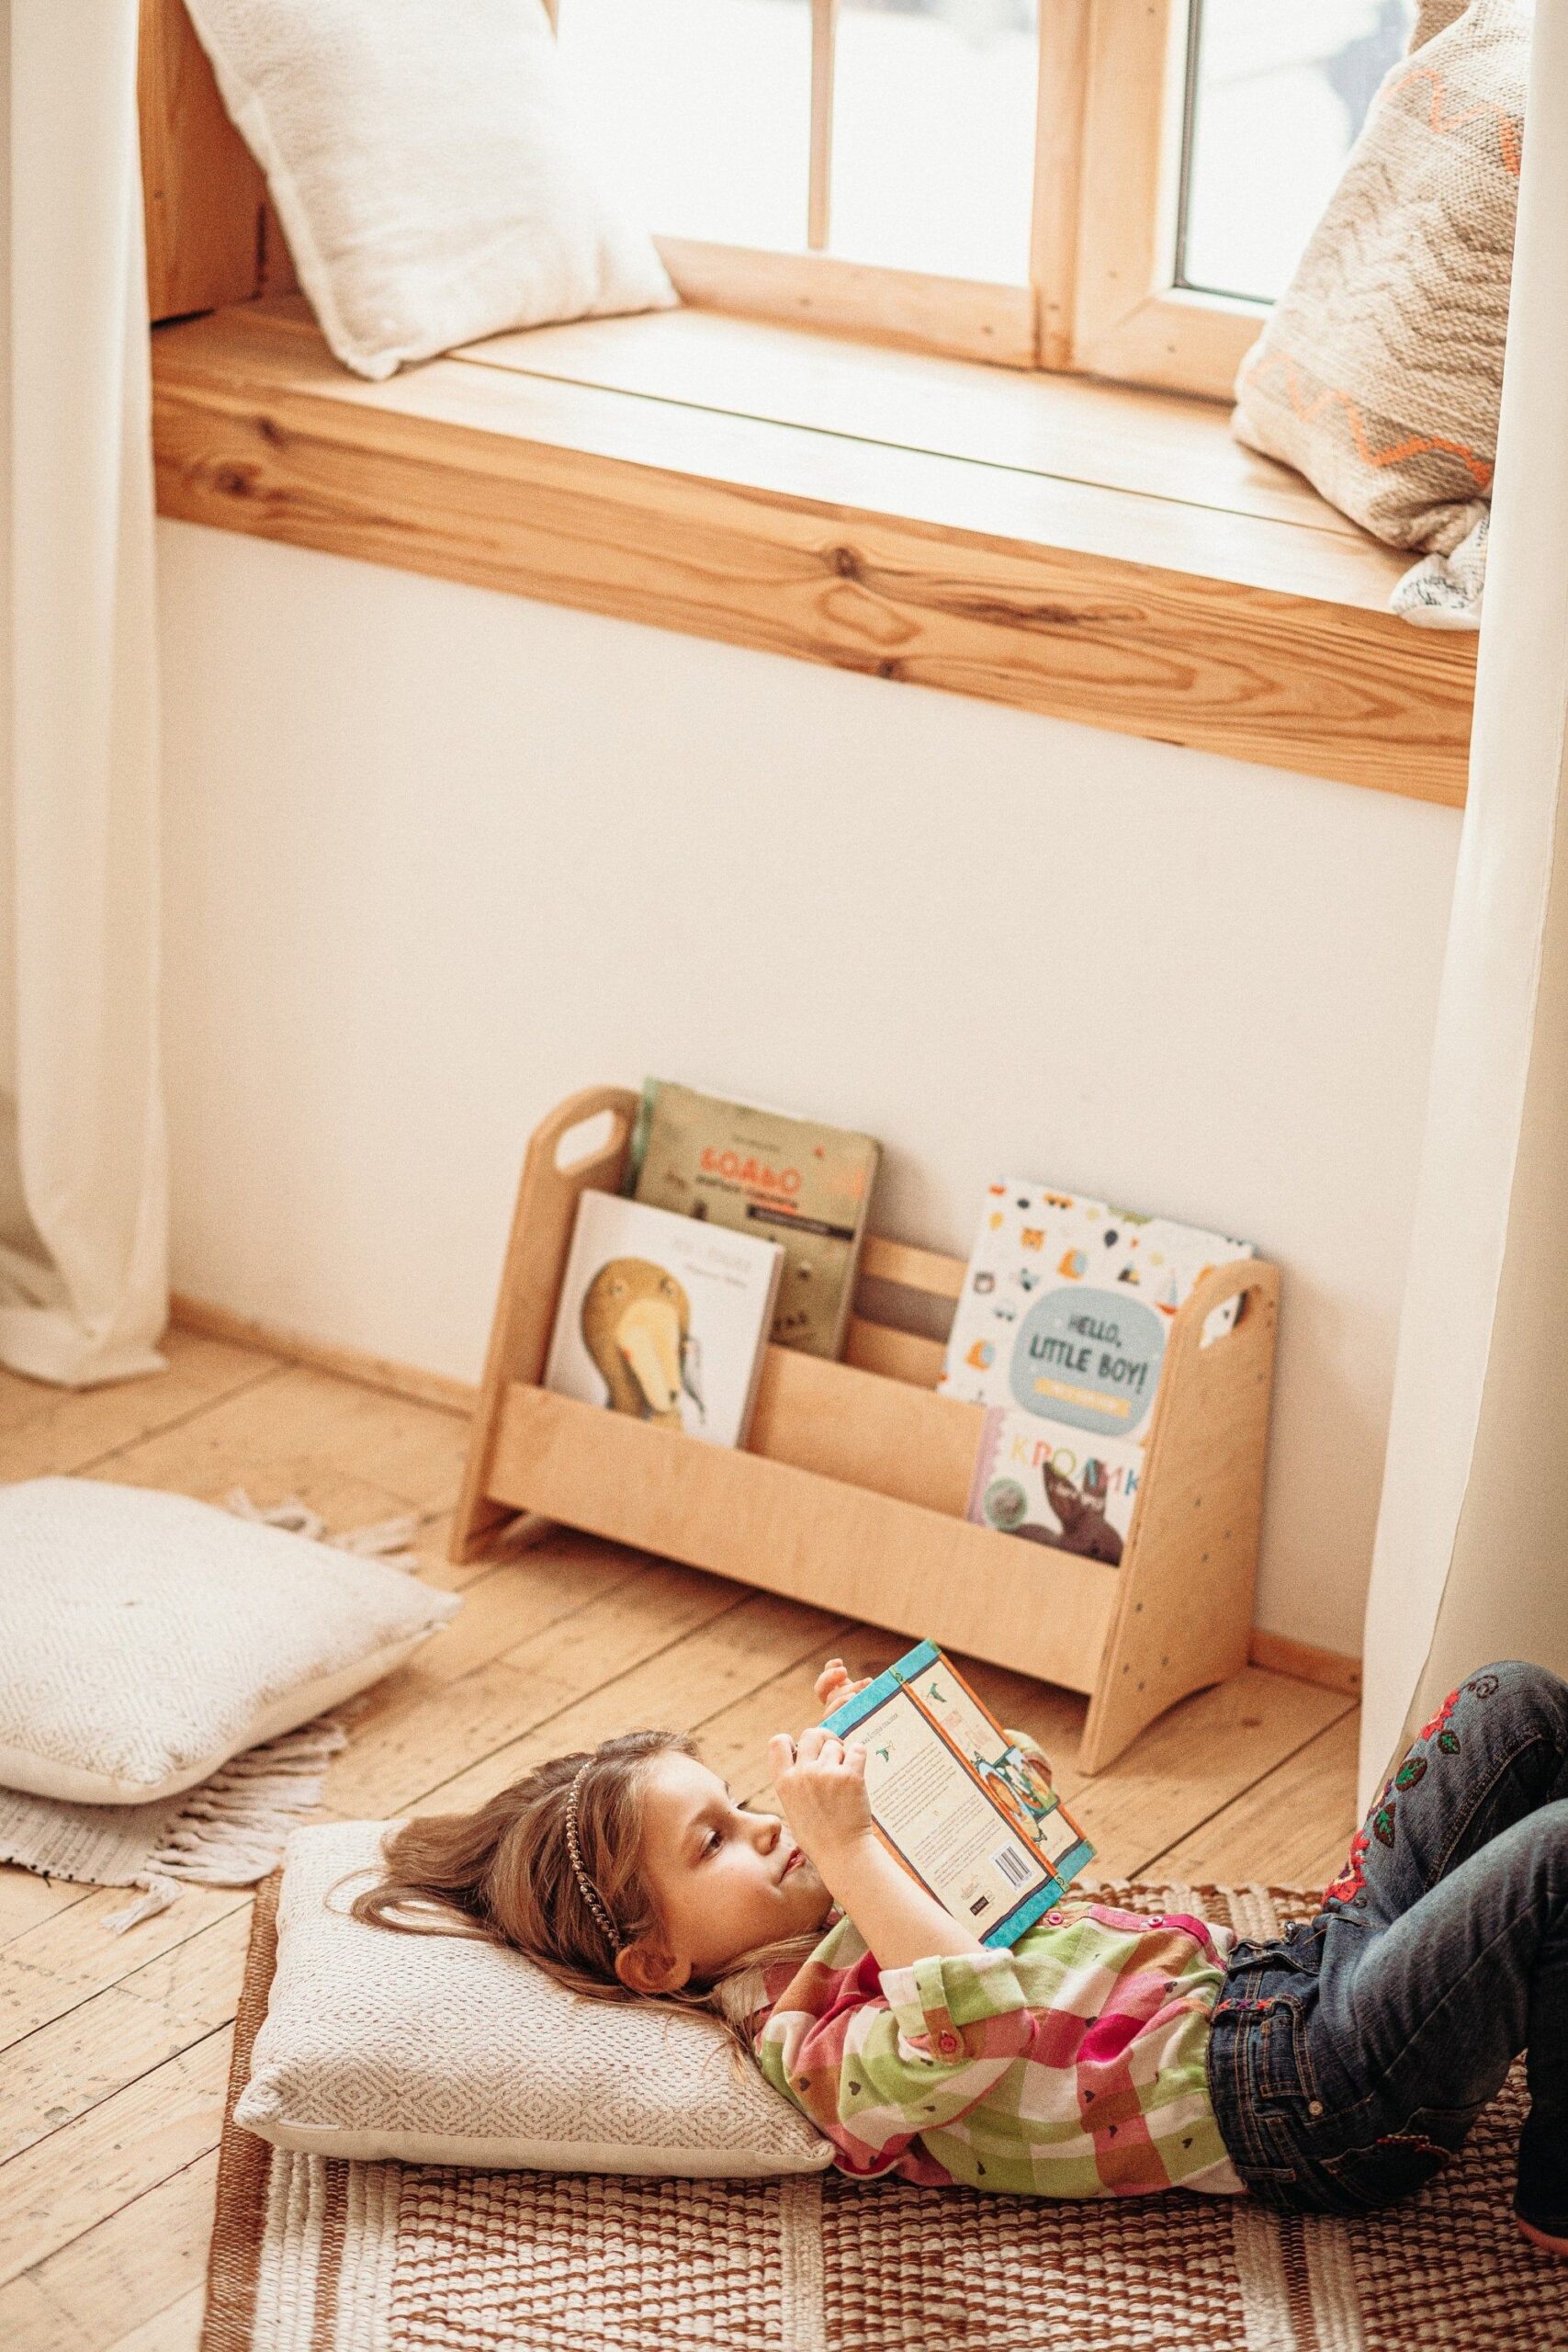 Tips for decorating with childrens
bookcase: